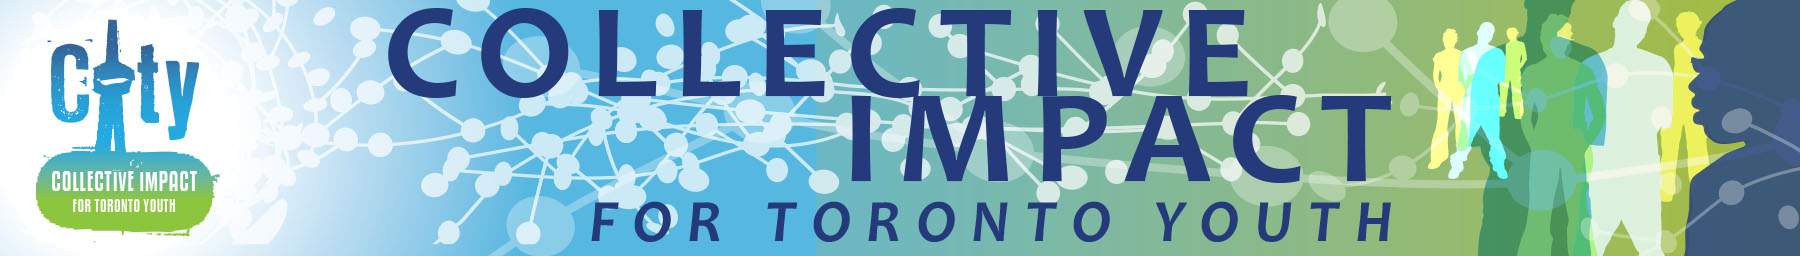 Collective Impact with Toronto Youth